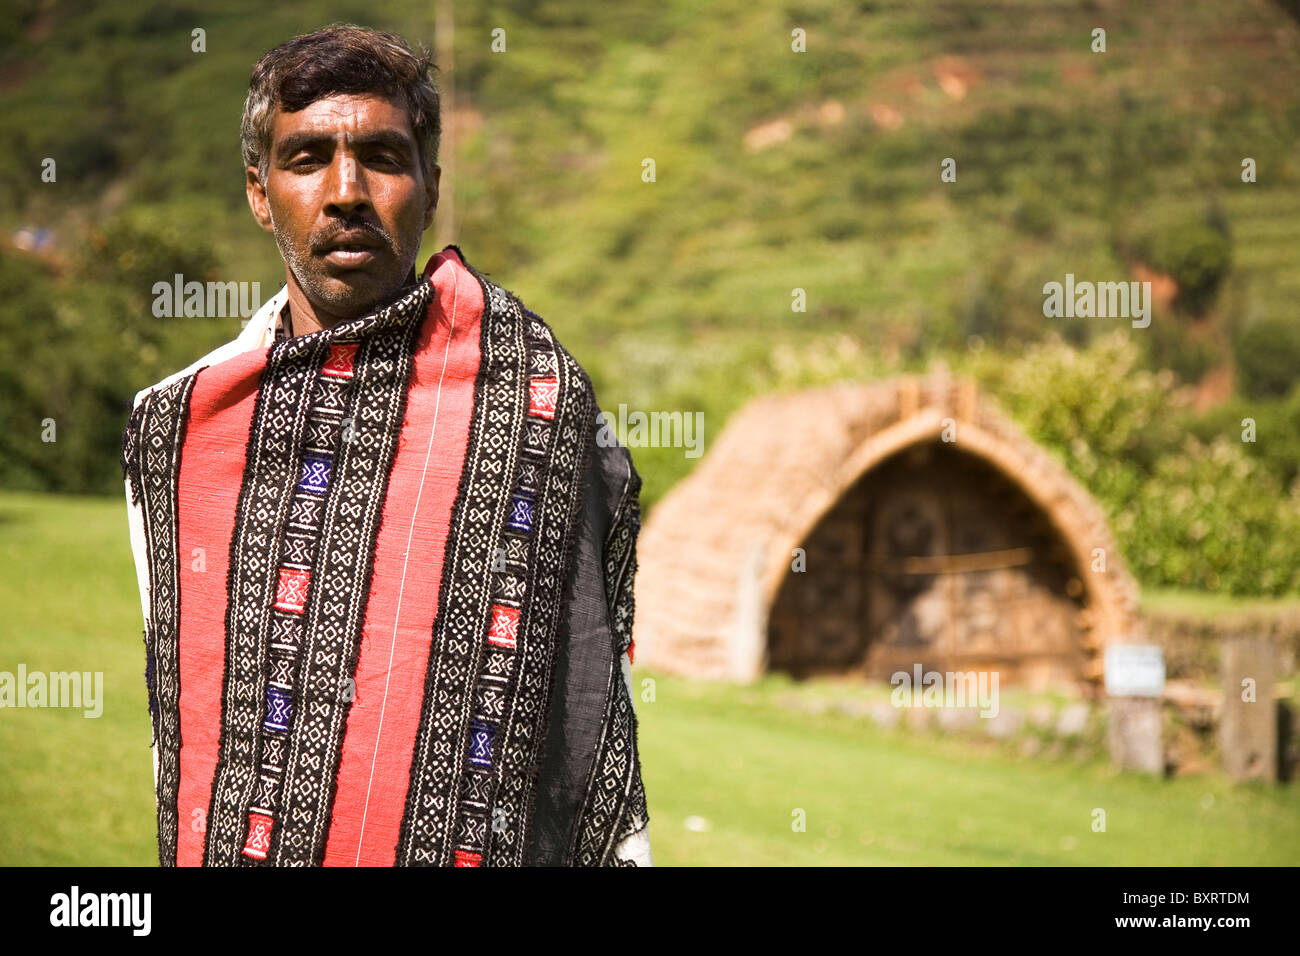 A man from the Toda tribe stands in front of the temple within the Ooty Botanical Gardens Mund (village) in Tamil Nadu, India. Stock Photo